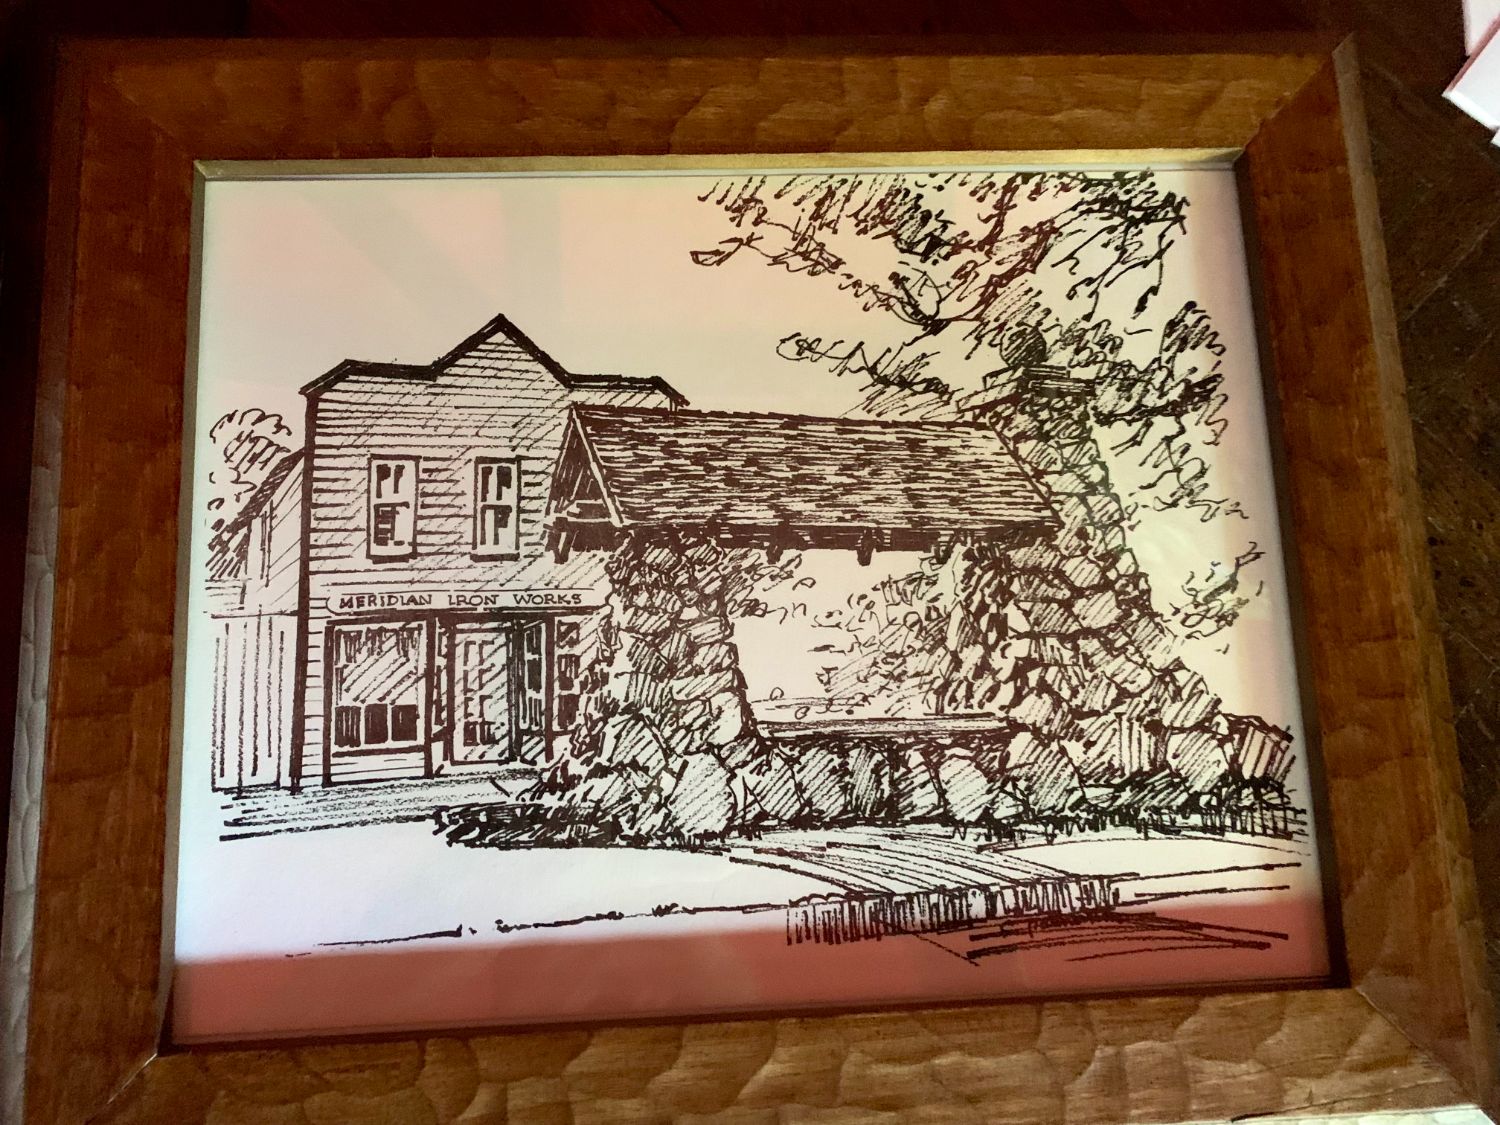 PHOTO: provided by SPPF | The South Pasadenan | A Carol Palmerston pen and ink drawing of the South Pasadena Historical Museum presented to Sheila Pautsch for her retirement.